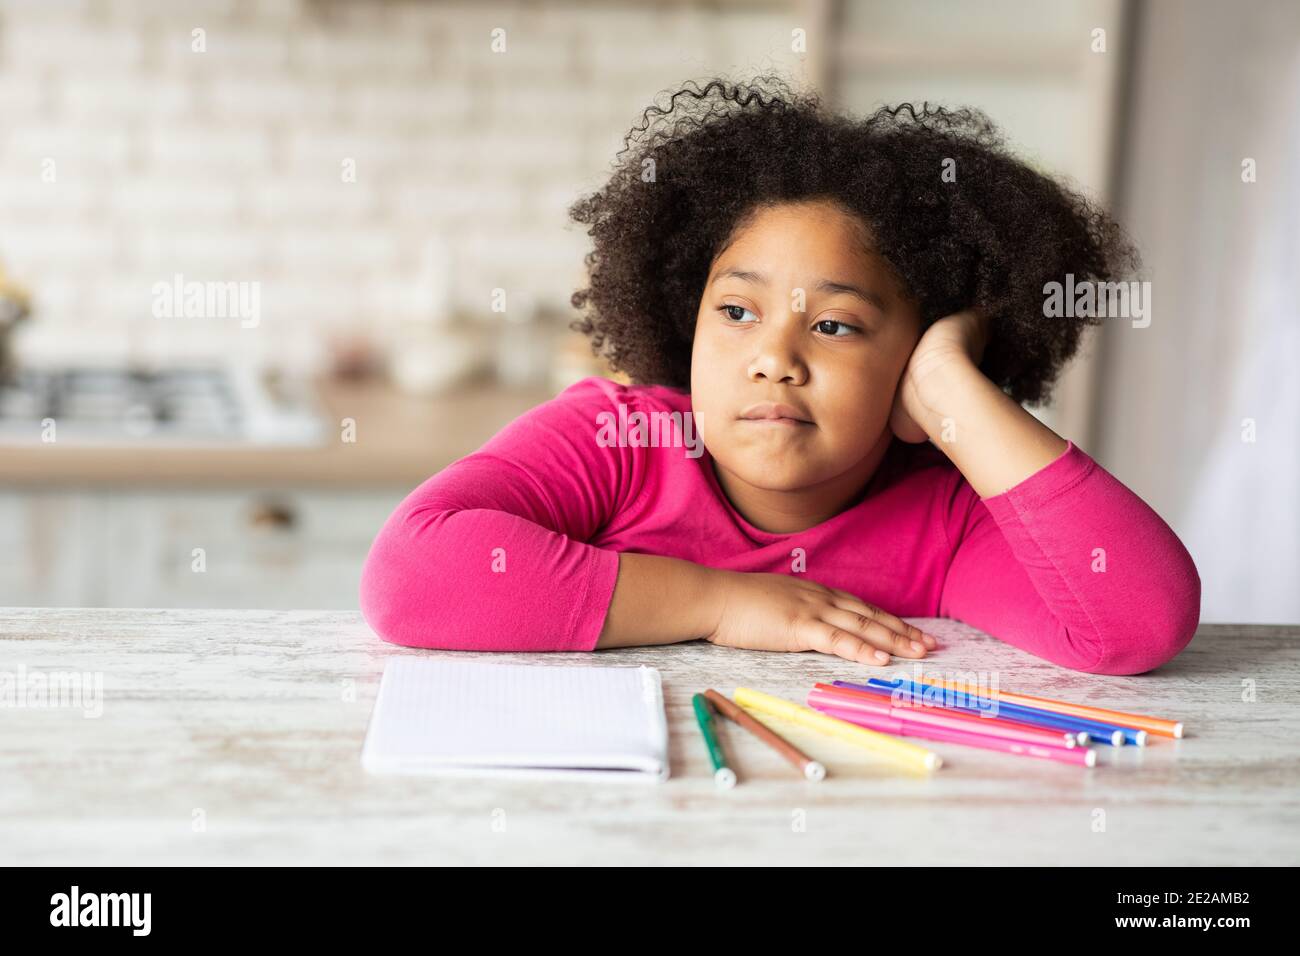 Boredom. Cute little bored black girl sitting at table in kitchen Stock Photo